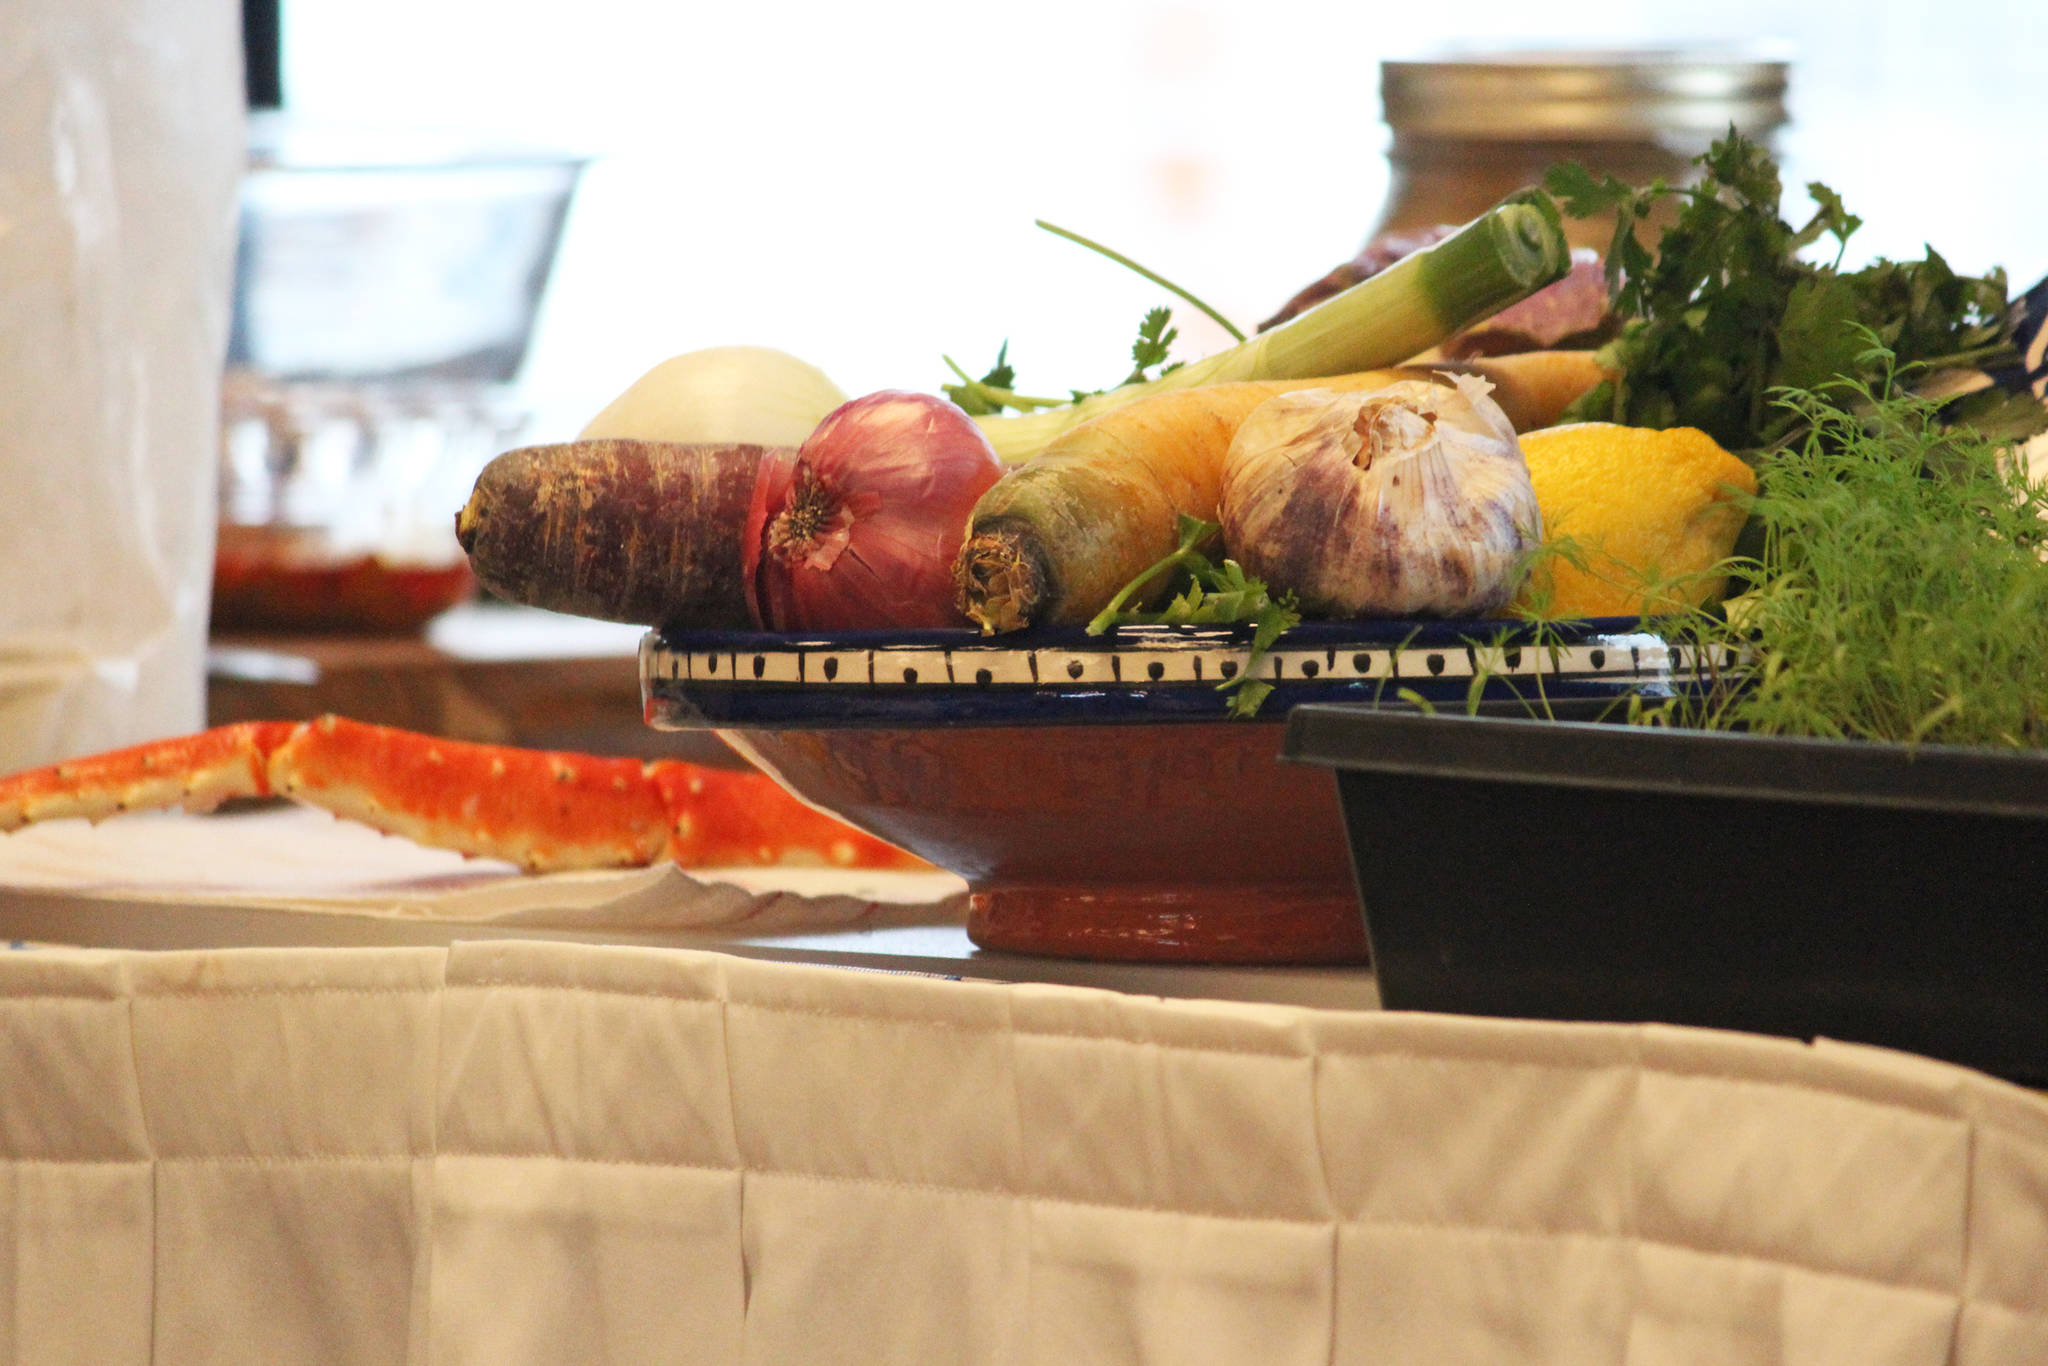 Vegetables and crab rest on a table during a cooking demo Saturday, March 9, 2019 at the Alaska Food Festival at Land’s End Resort in Homer, Alaska. (Photo by Megan Pacer/Homer News)